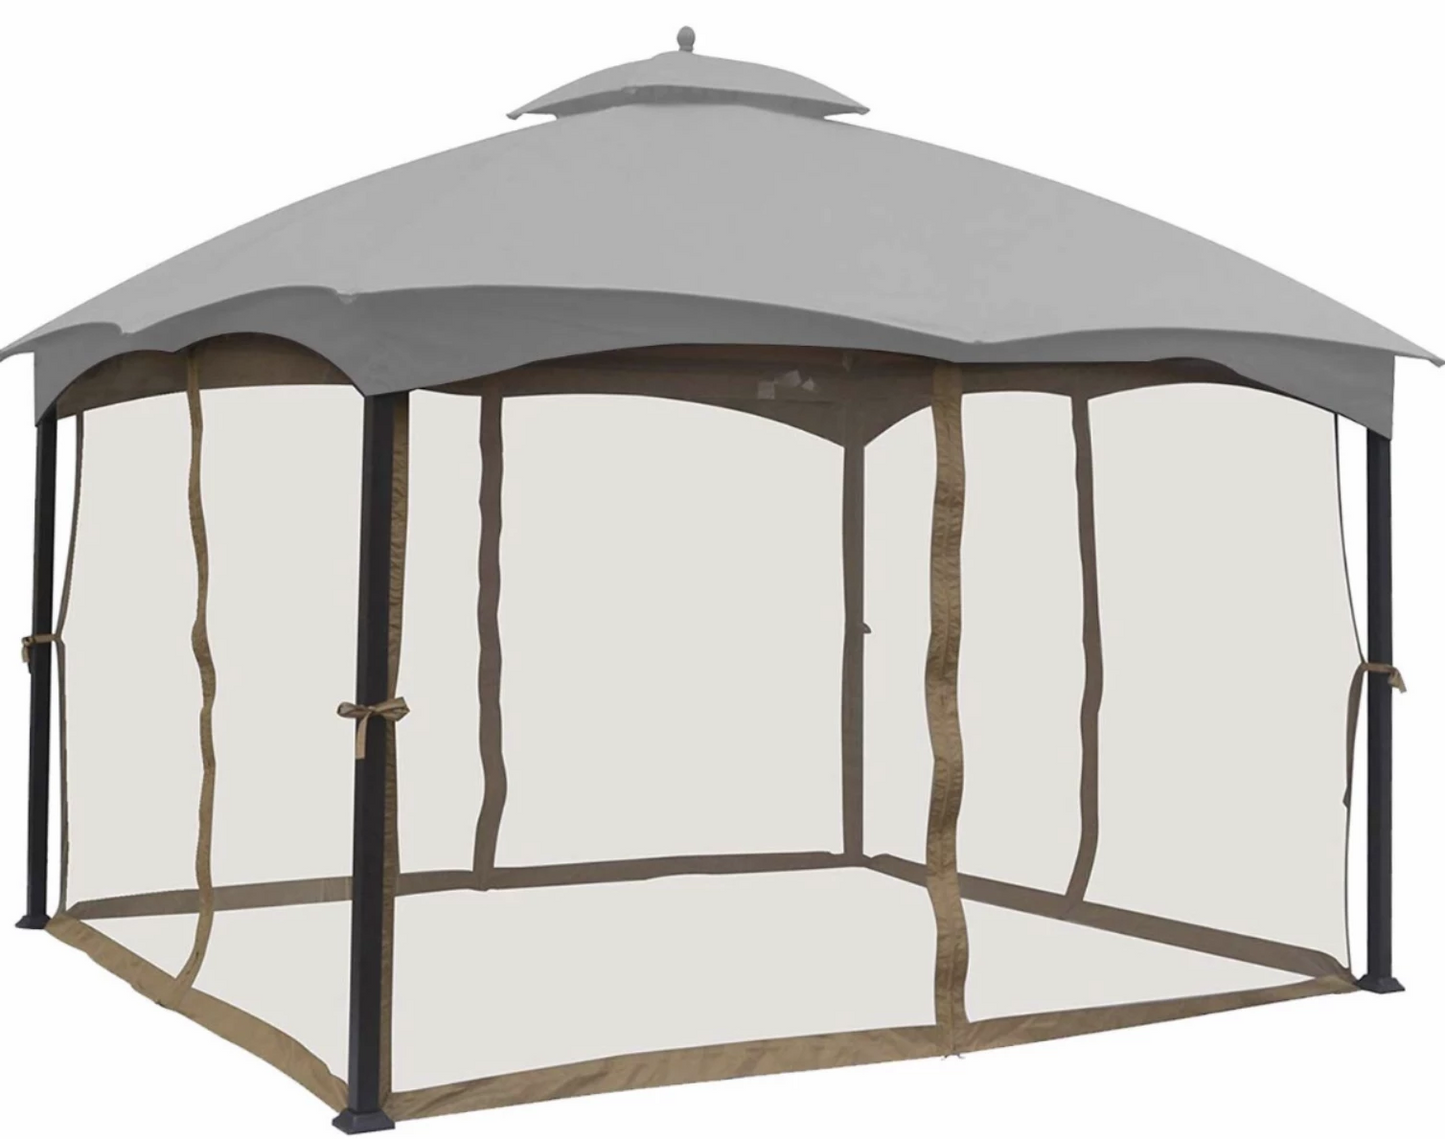 Lowes Allen and Roth 10 X 12 Universal Netting Replacement Gazebo Mosquito Screen Super SALE TODAY ONLY